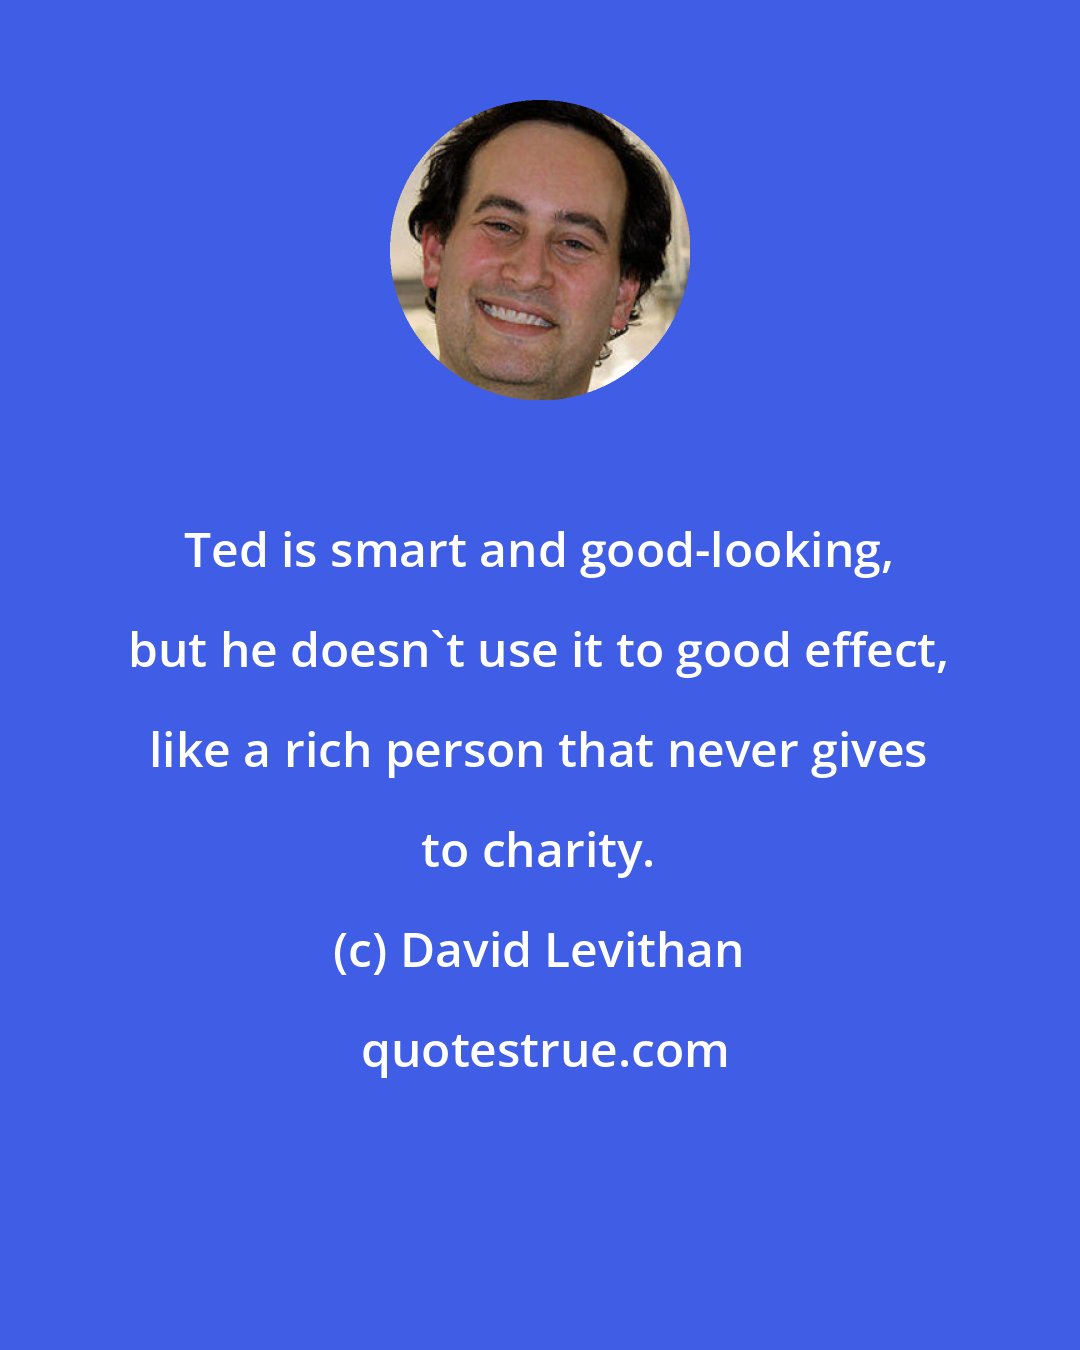 David Levithan: Ted is smart and good-looking, but he doesn't use it to good effect, like a rich person that never gives to charity.